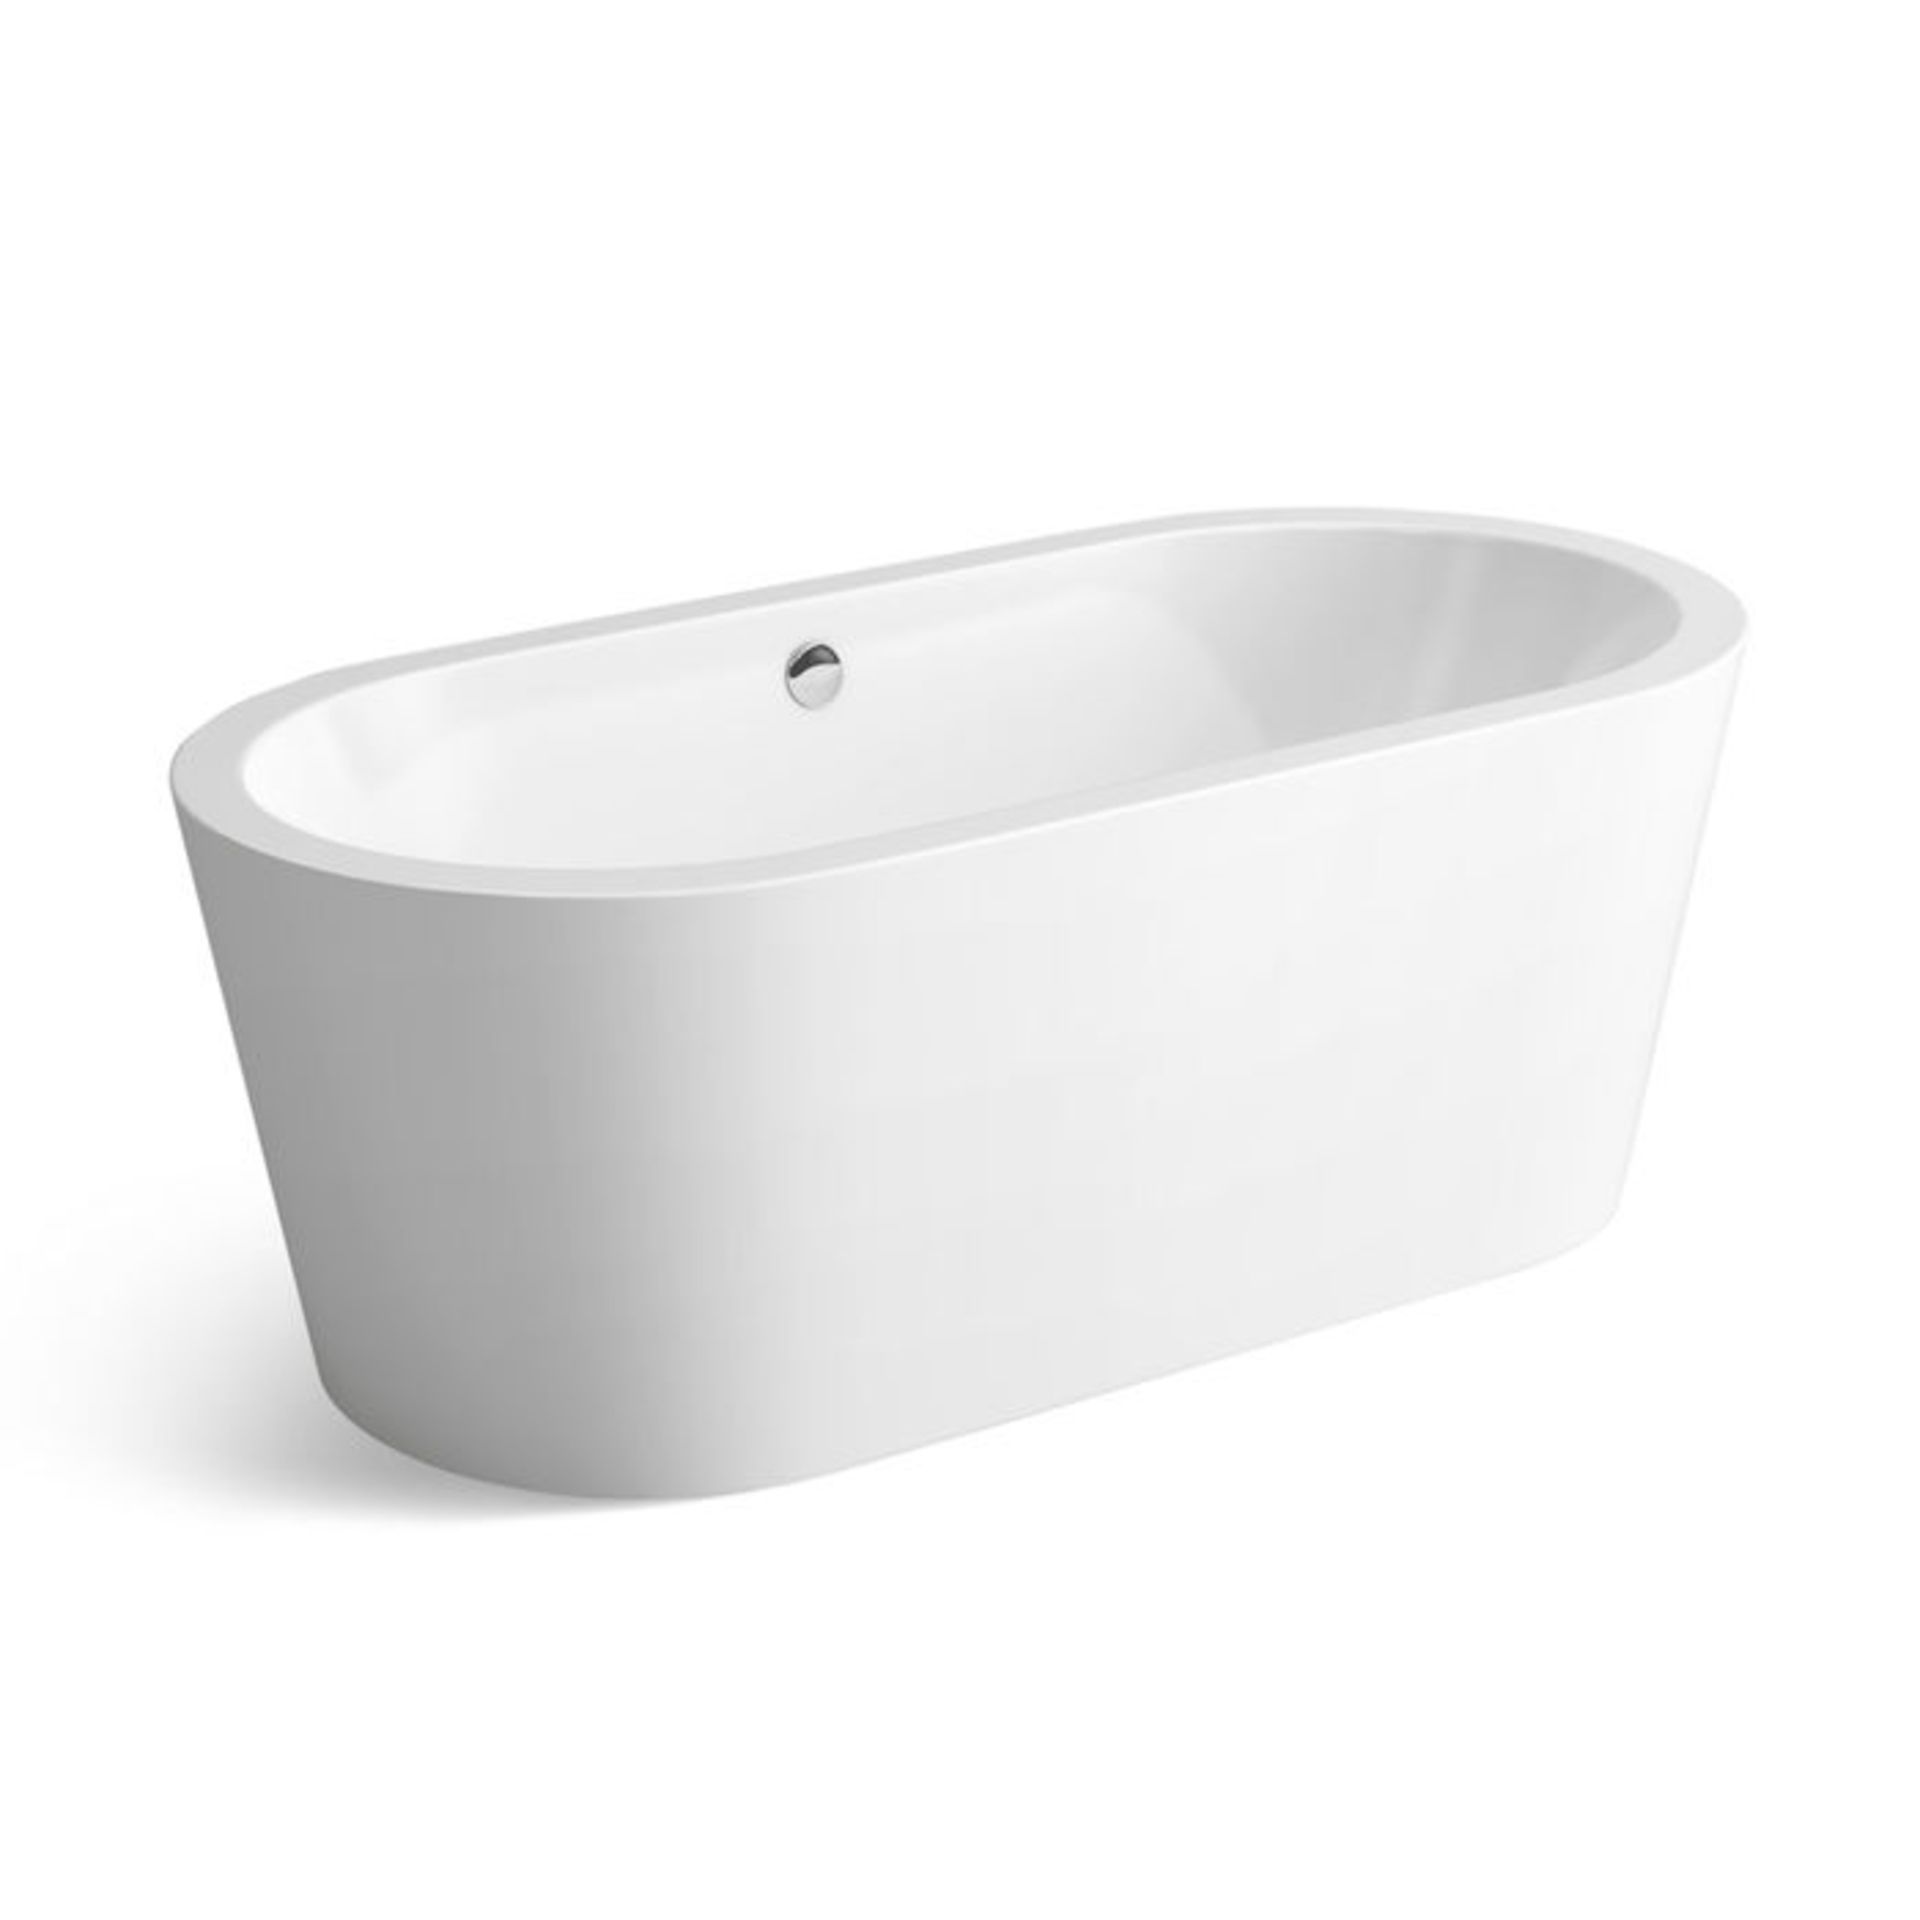 (GR176) 1700X800mm Isla Freestanding Bath. Manufactured from High Quality Acrylic, complimented by a - Image 2 of 5